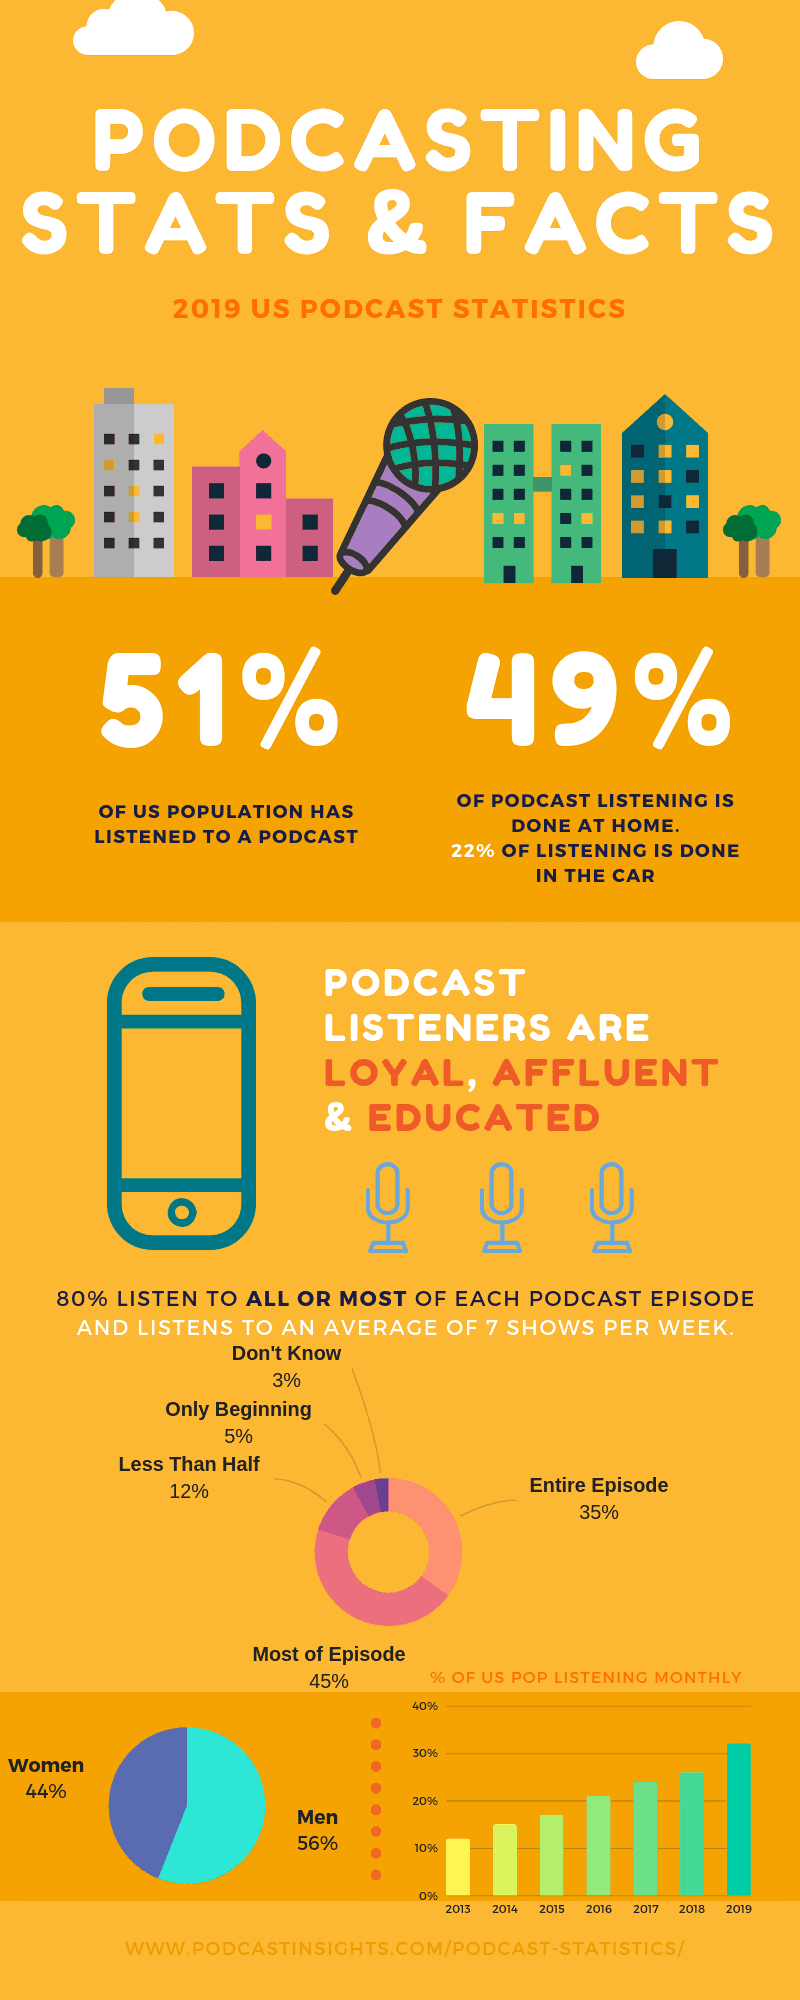 Podcasting-infographic-stats